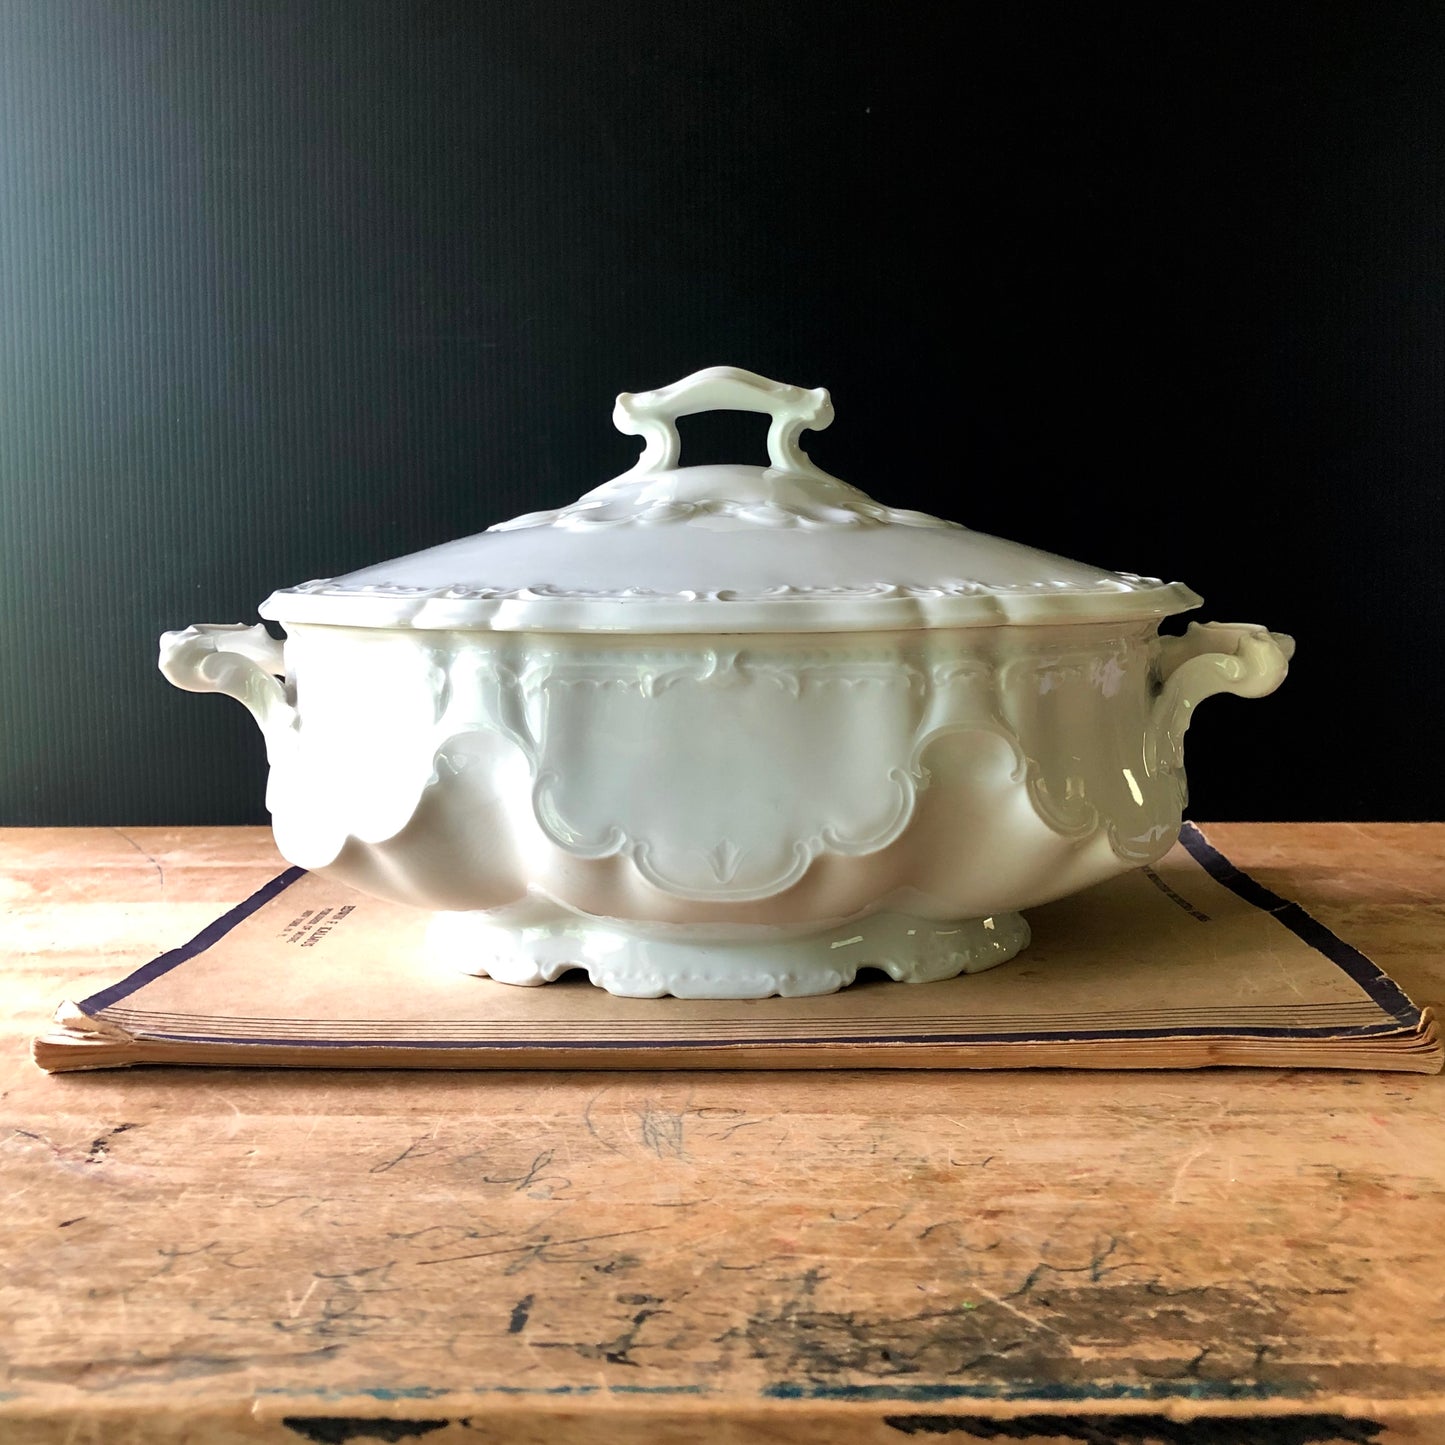 Antique Haviland White Oval Soup Tureen (c. early 1900s)